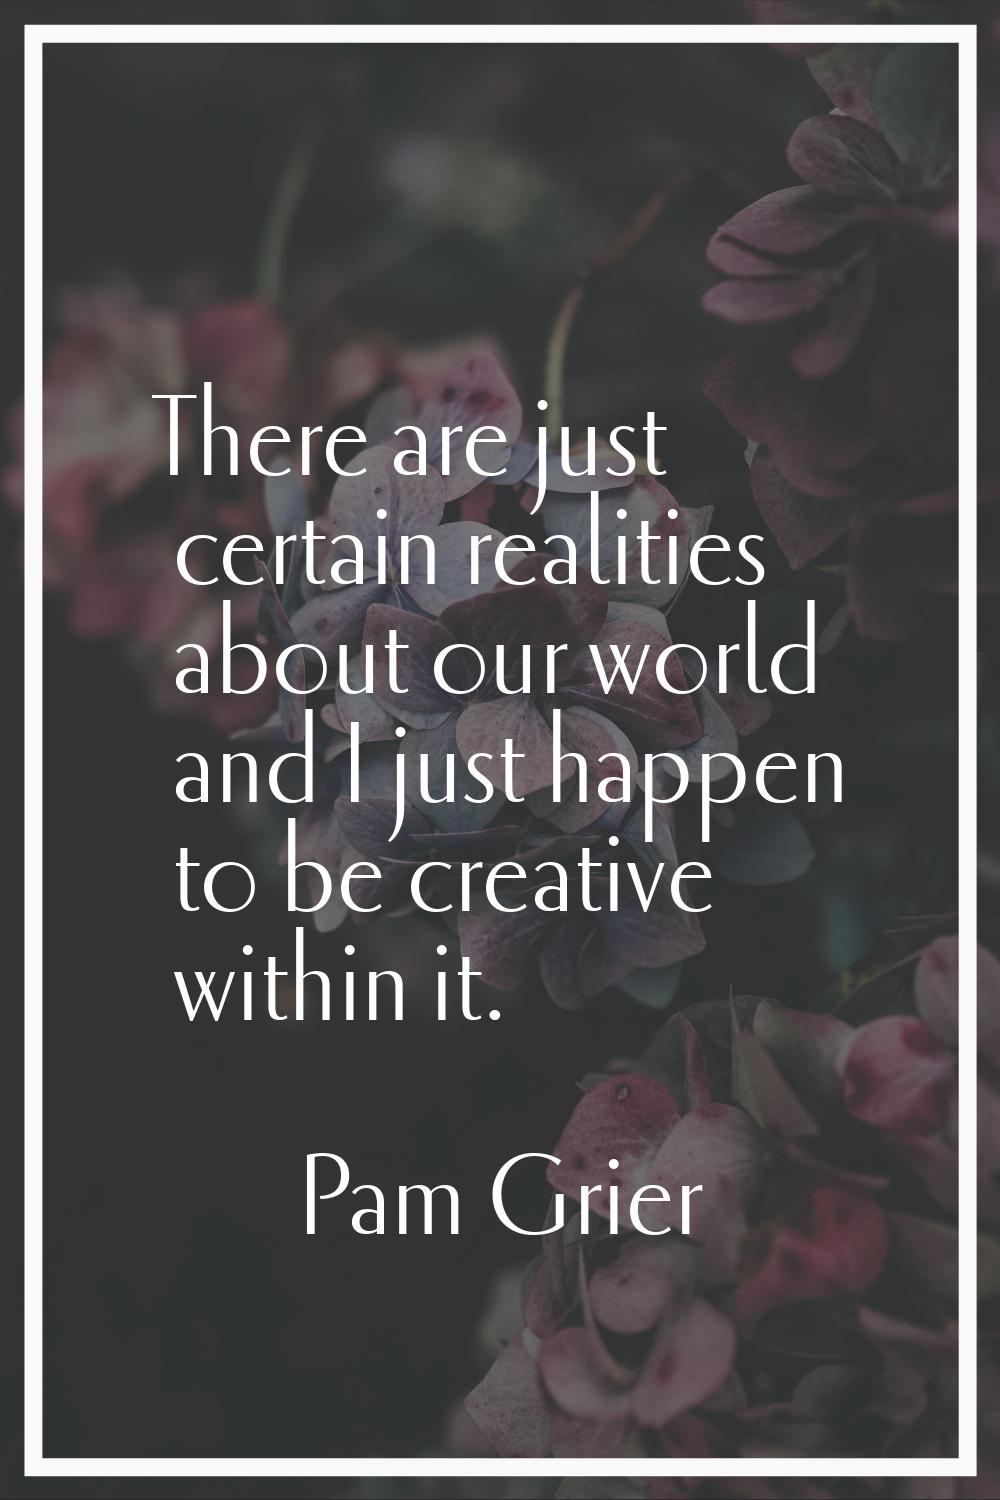 There are just certain realities about our world and I just happen to be creative within it.